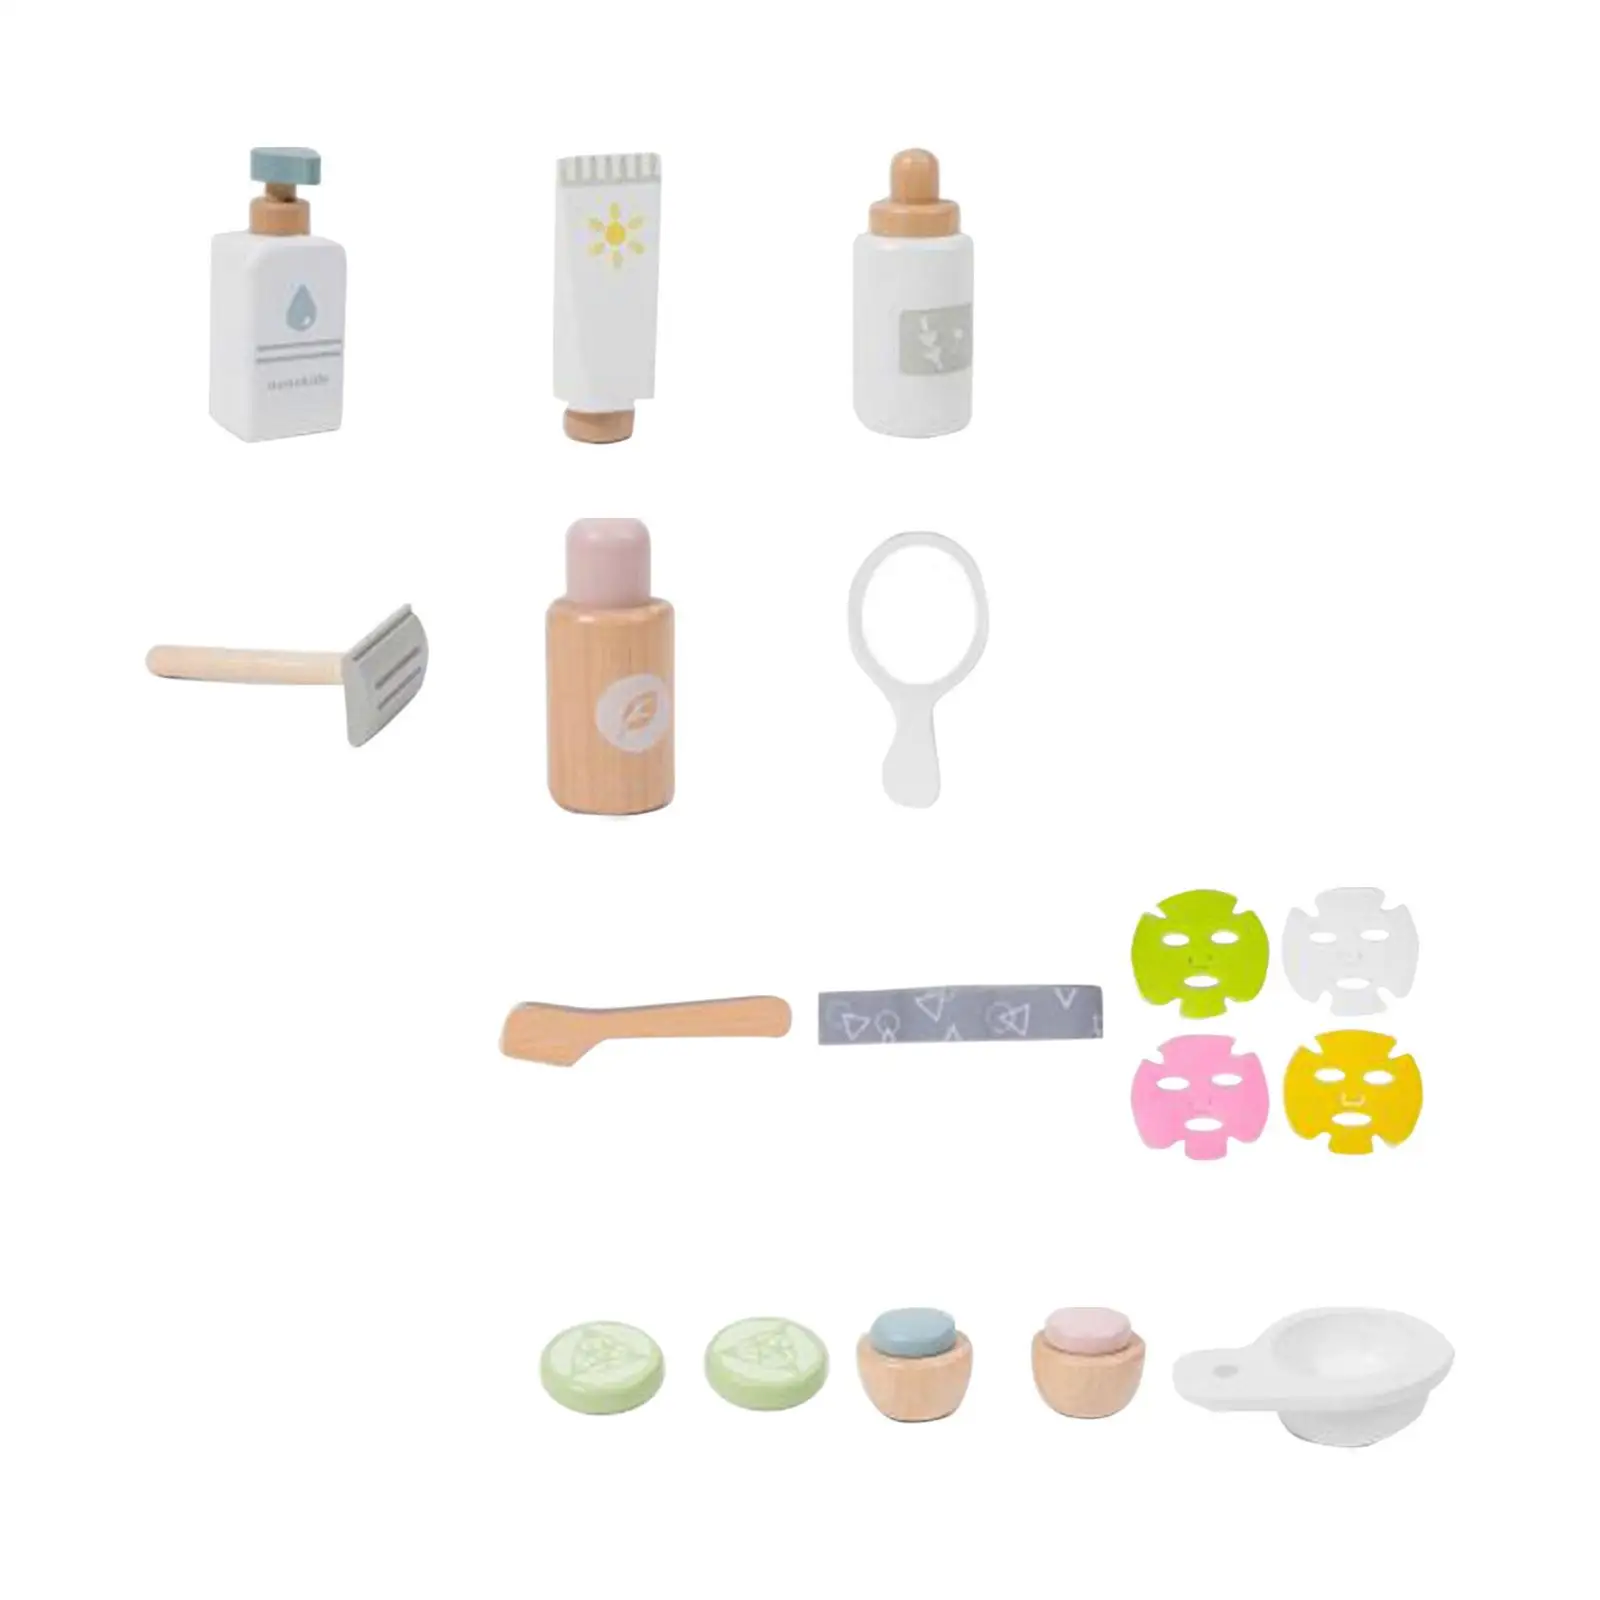 Makeup Toy Kits Role Playing Facial Mask Toy Pretend Makeup Kits for Halloween Present Gift Princess Dress up Kids Children